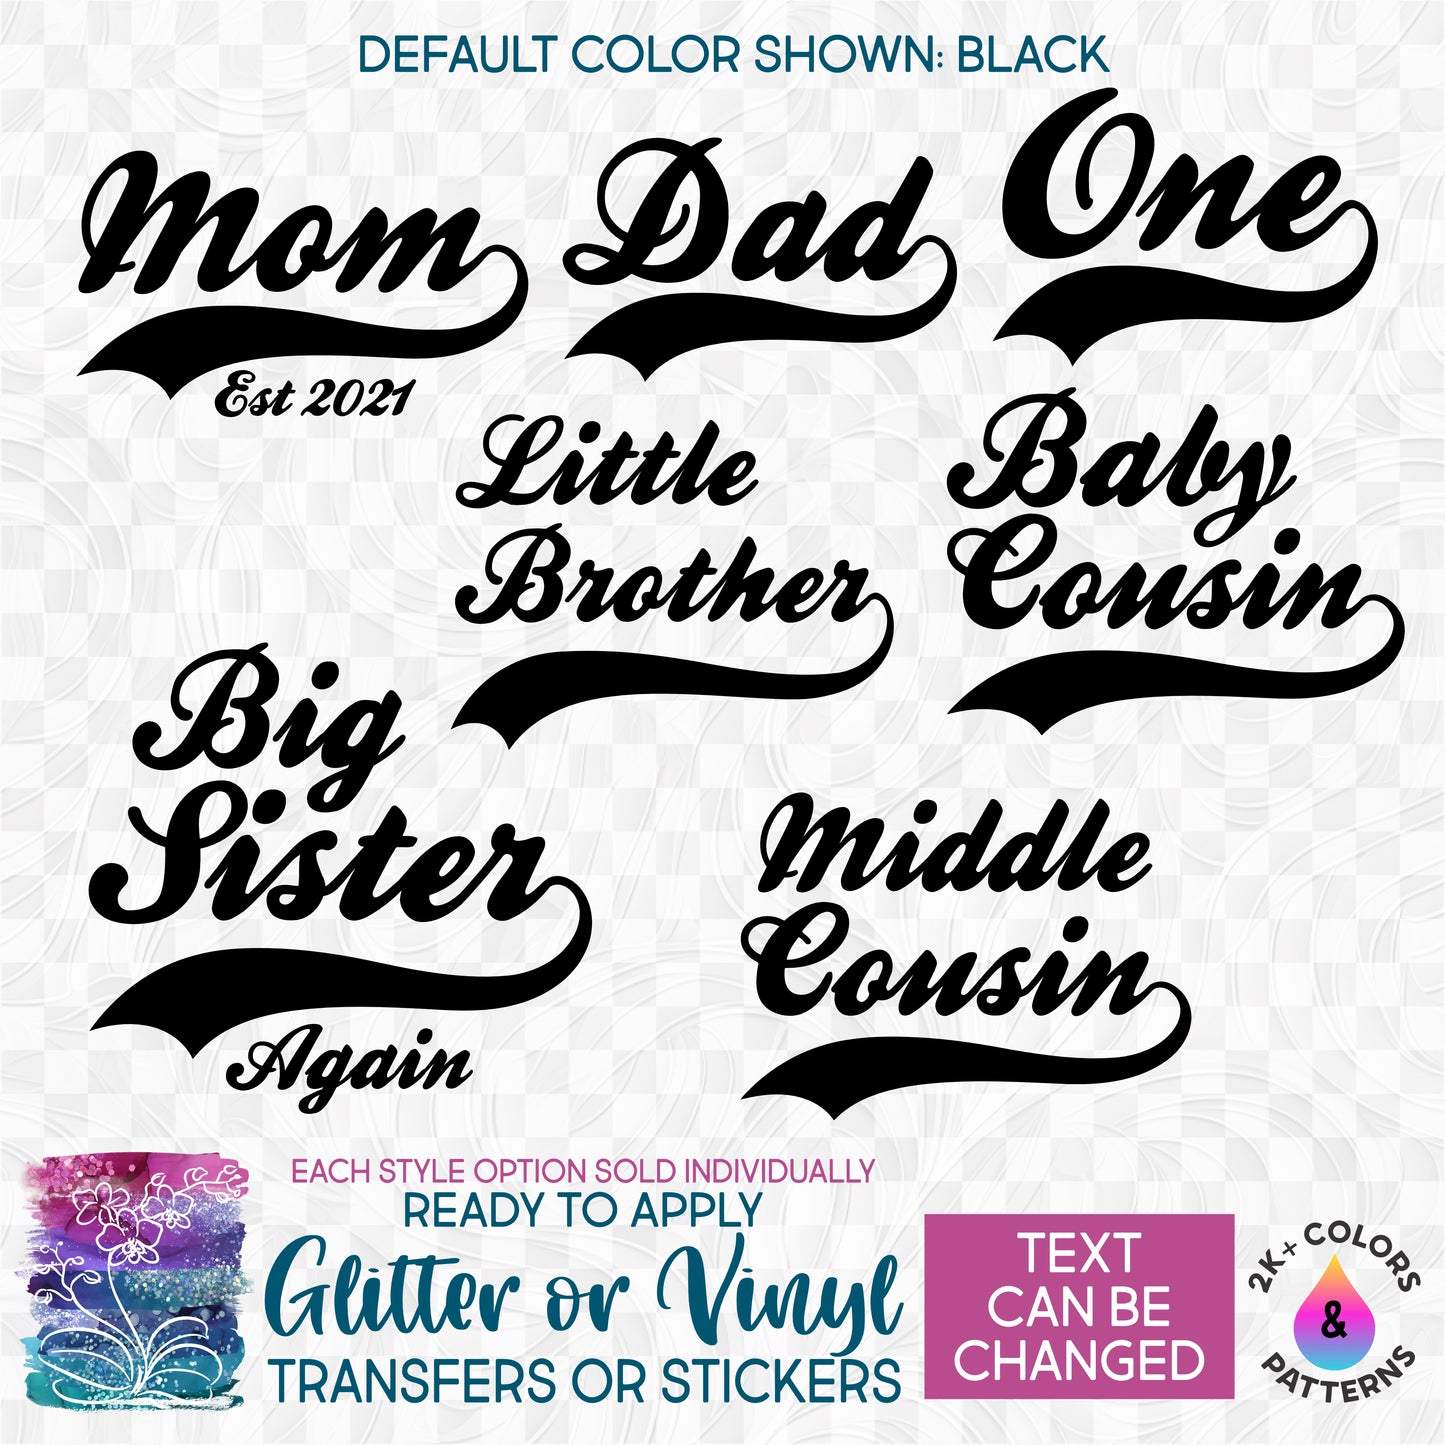 s122-T1 Family Mommy Daddy Brother Sister Cousin with Athletic Sports Tail Made-to-Order Iron-On Transfer or Sticker